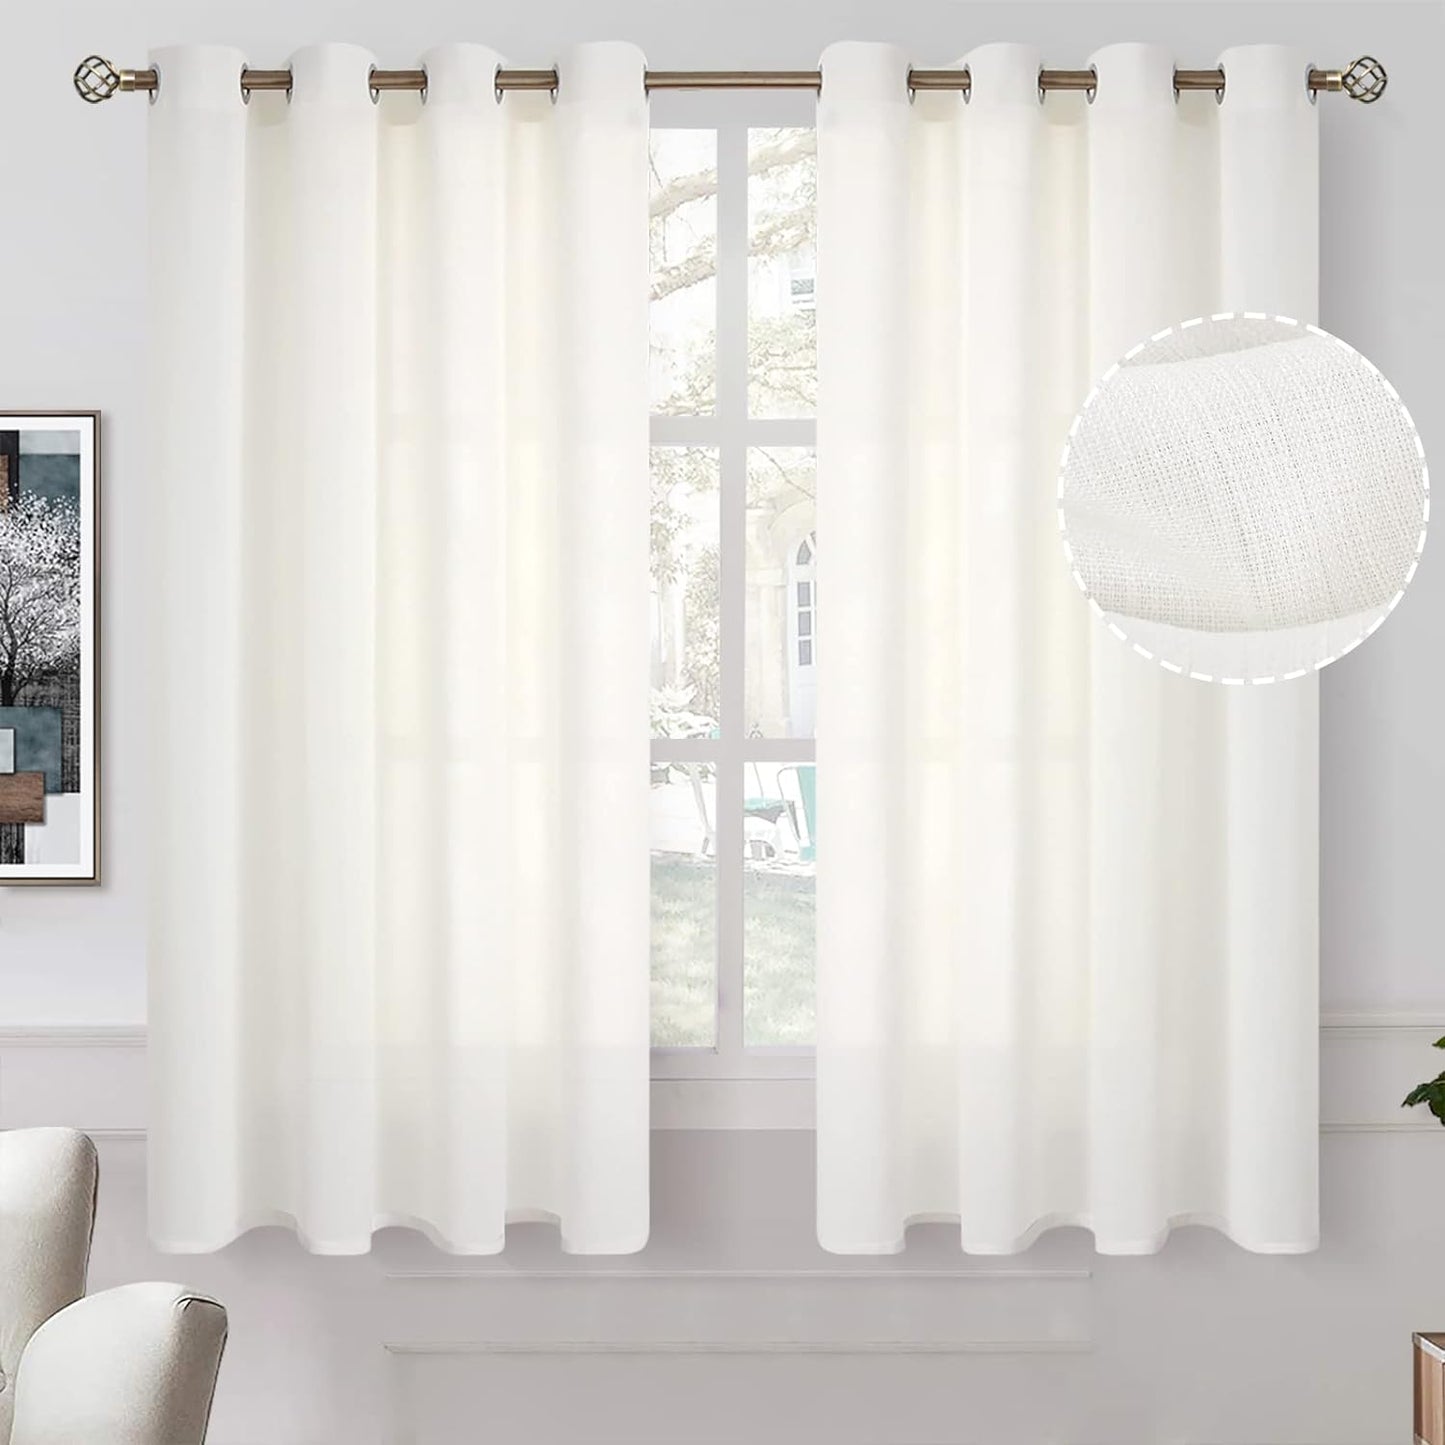 Bgment Natural Linen Look Semi Sheer Curtains for Bedroom, 52 X 54 Inch White Grommet Light Filtering Casual Textured Privacy Curtains for Bay Window, 2 Panels  BGment Ivory Cream 52W X 63L 